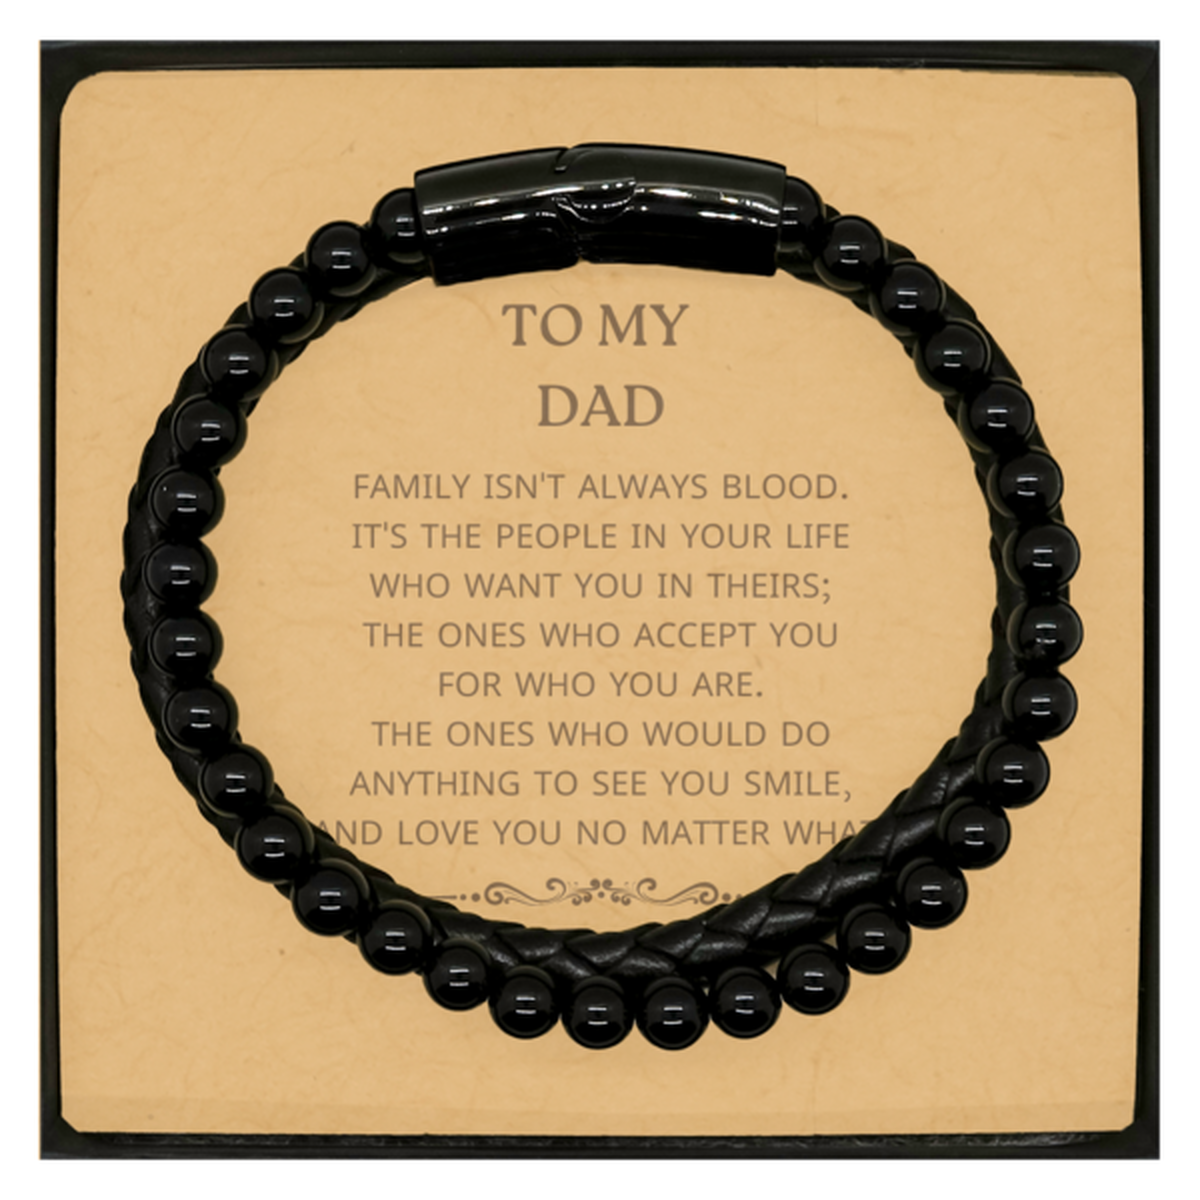 To My Dad Gifts, Family isn't always blood, Dad Stone Leather Bracelets, Birthday Christmas Unique Present For Dad